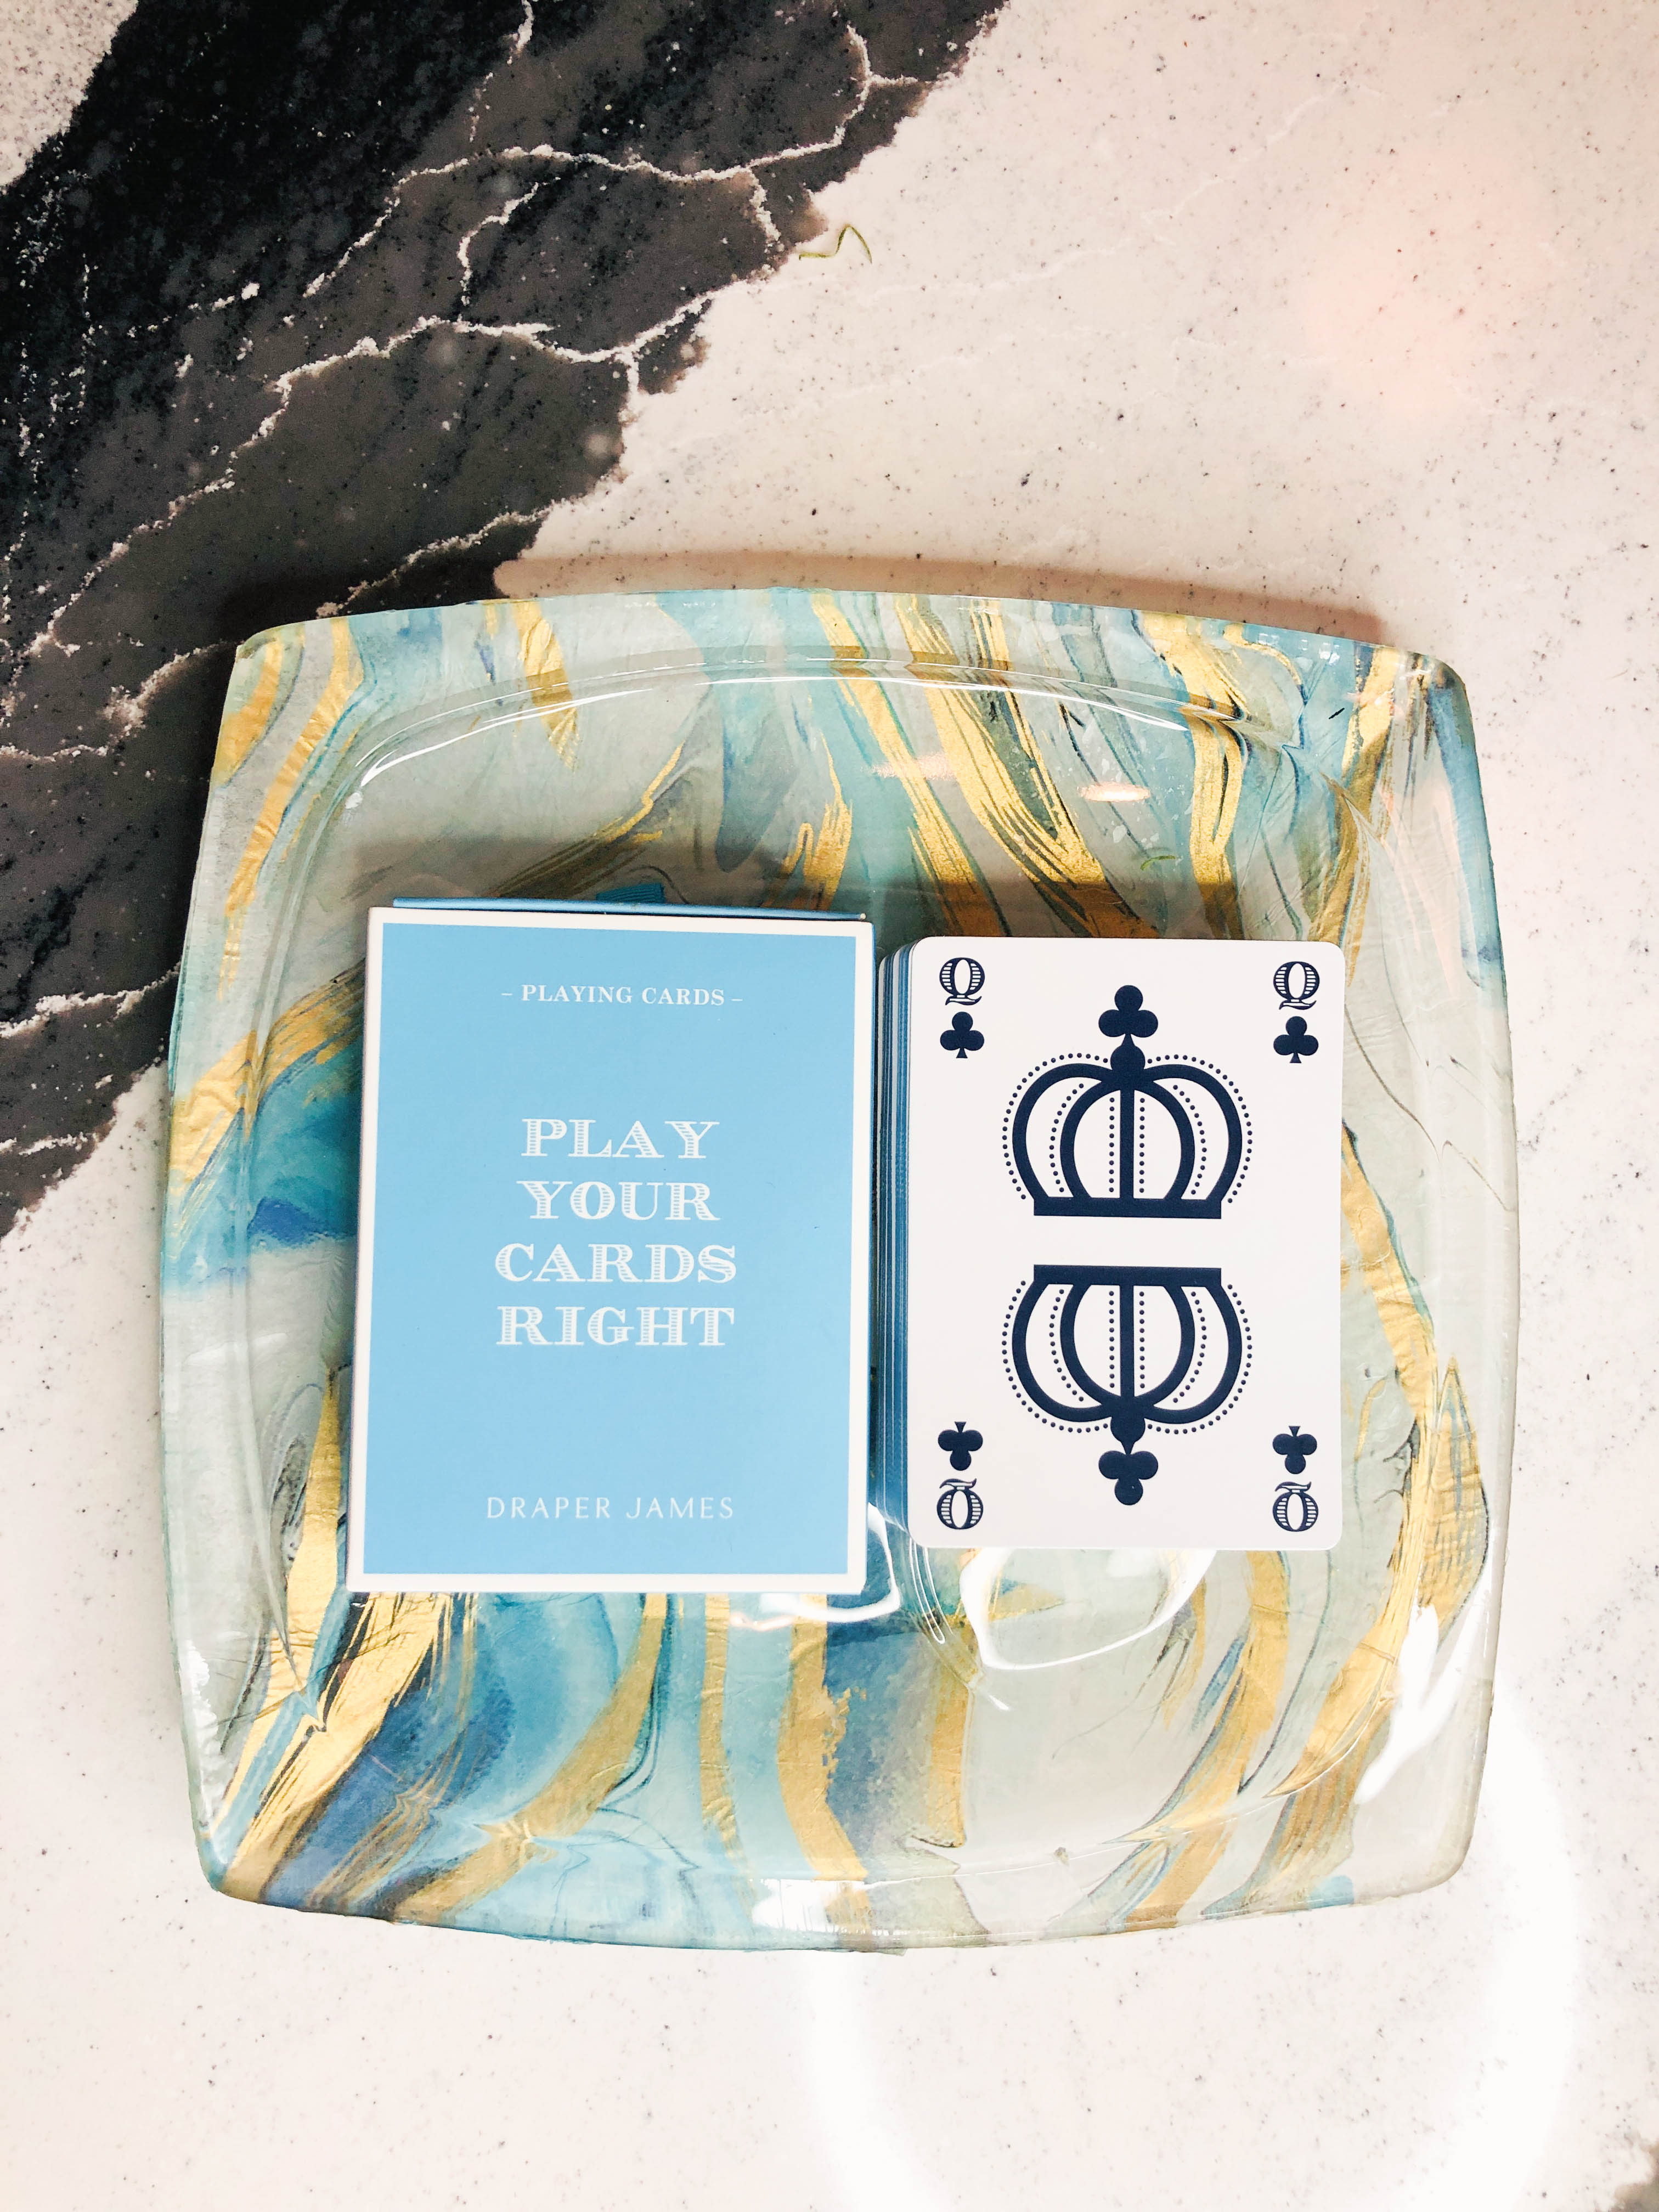 A deck of cards sitting on top of a completed glass snack plate project.